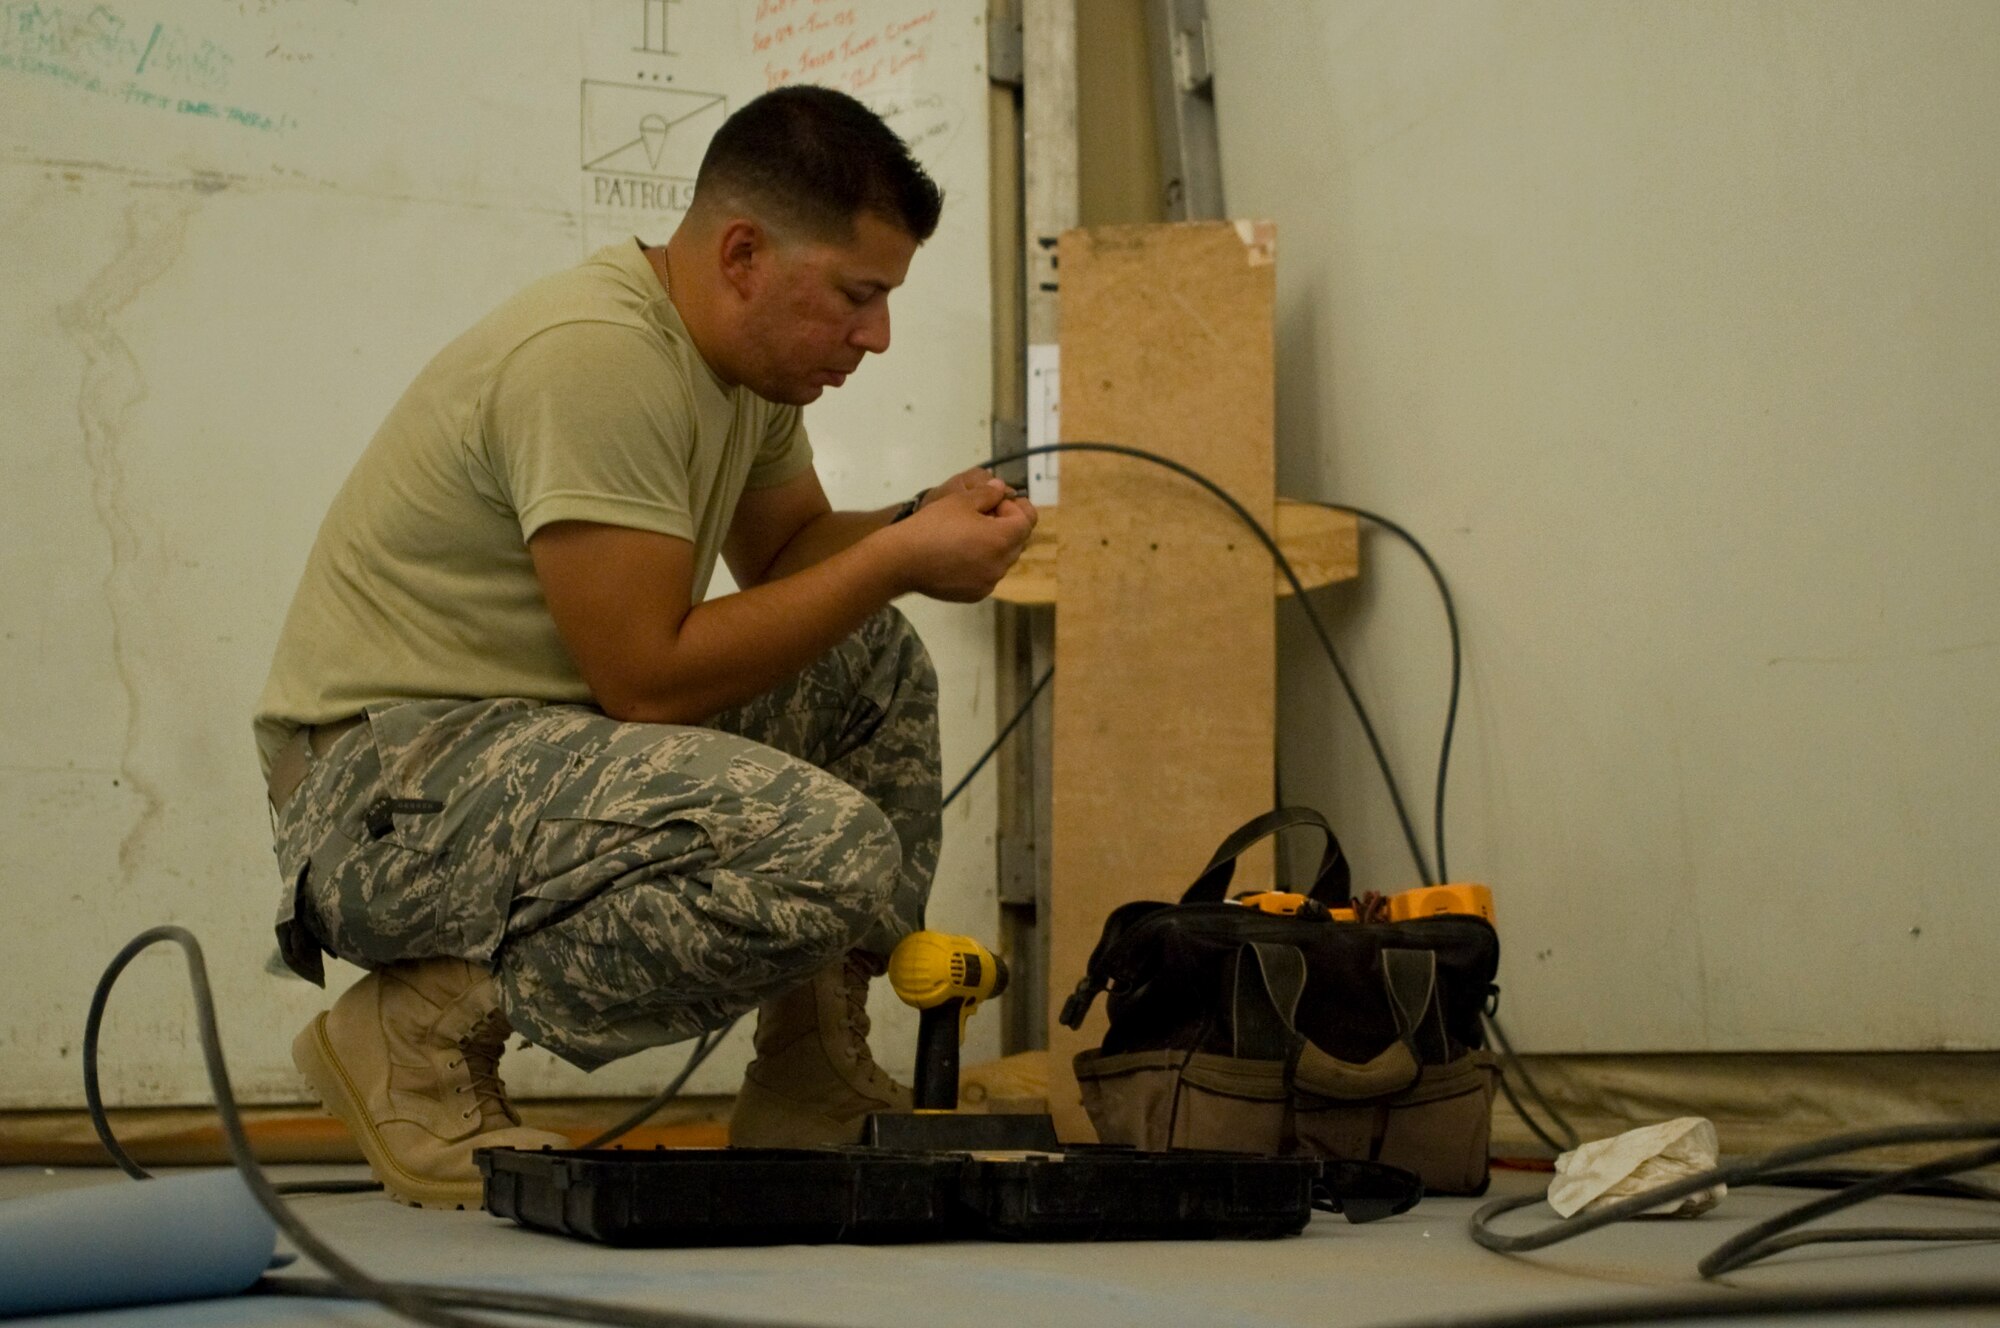 ALI BASE, Iraq -- Staff Sgt. Javiel Ladines, 407th Expeditionary Communications Squadron network technician, strips insulation off of wires to be used for a phone connection Aug. 8, 2008. The 407th ECS "Wire Dogs" installed fiber optics inside a new building that the Navy will use. By installing the fiber optics, they are giving telephone and Internet connections to the Navy which enables them to continue their mission during transitions. Sergeant Ladines is deployed from Tinker Air Force Base, Okla. (U.S. Air Force photo/Airman 1st Class Christopher Griffin)